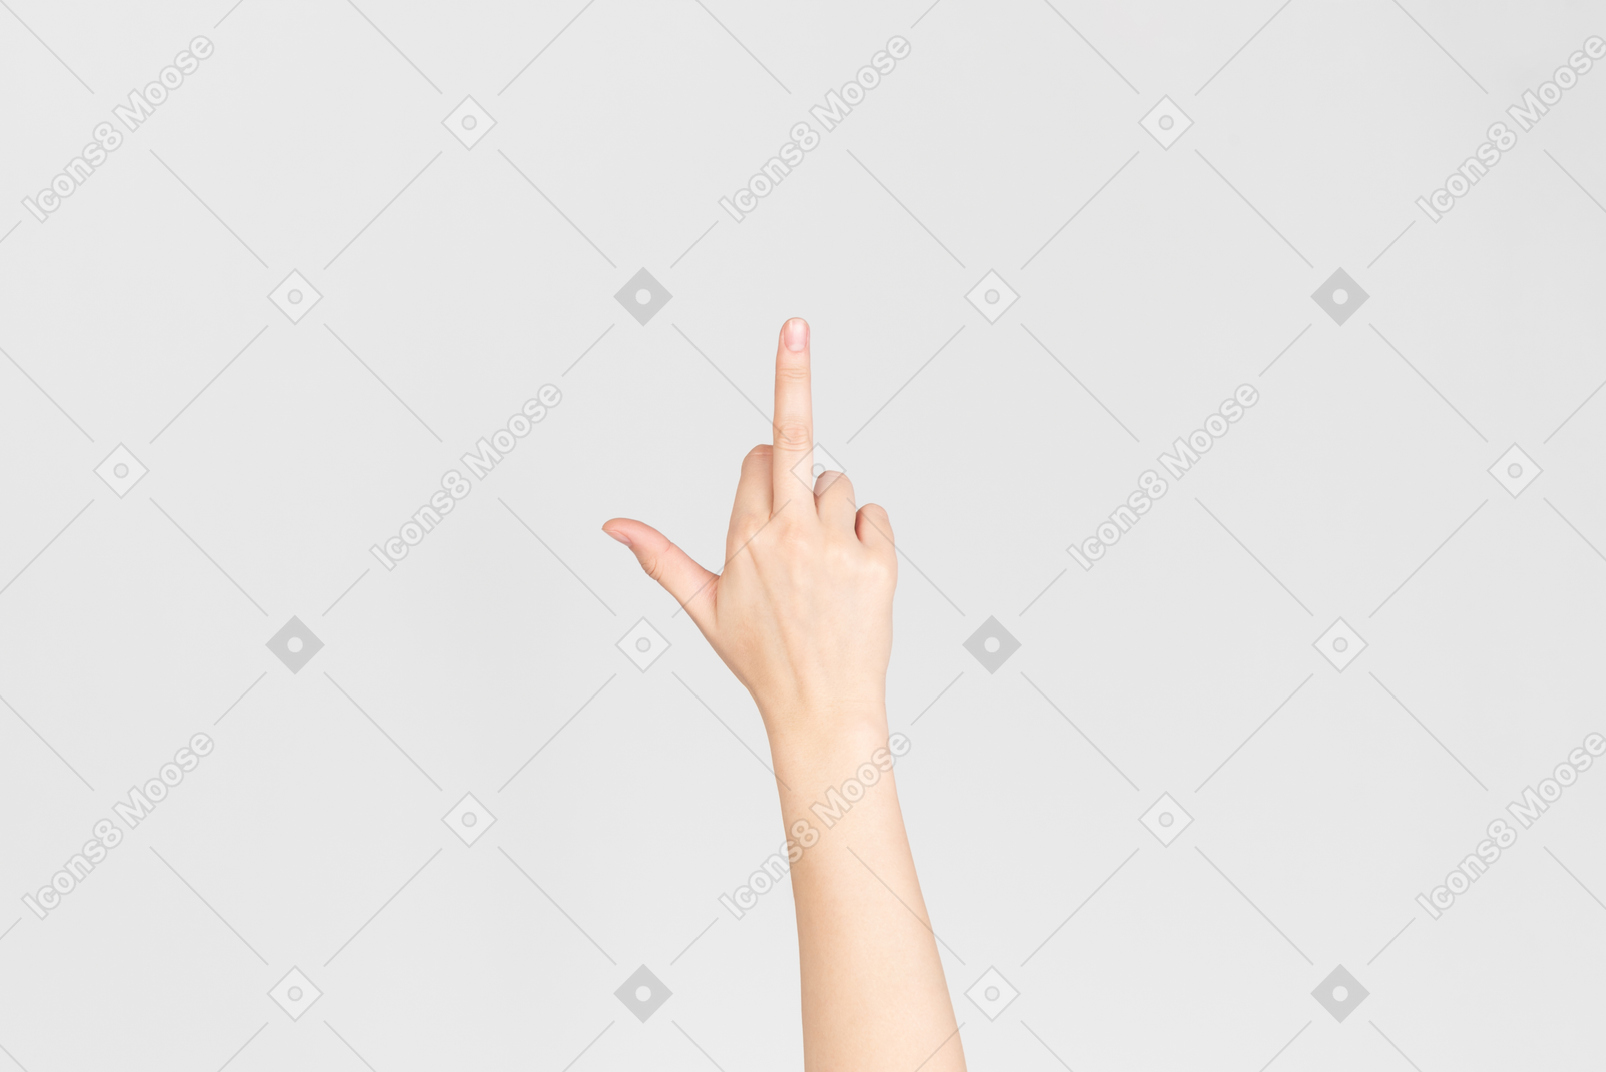 Female hand showing middle finger